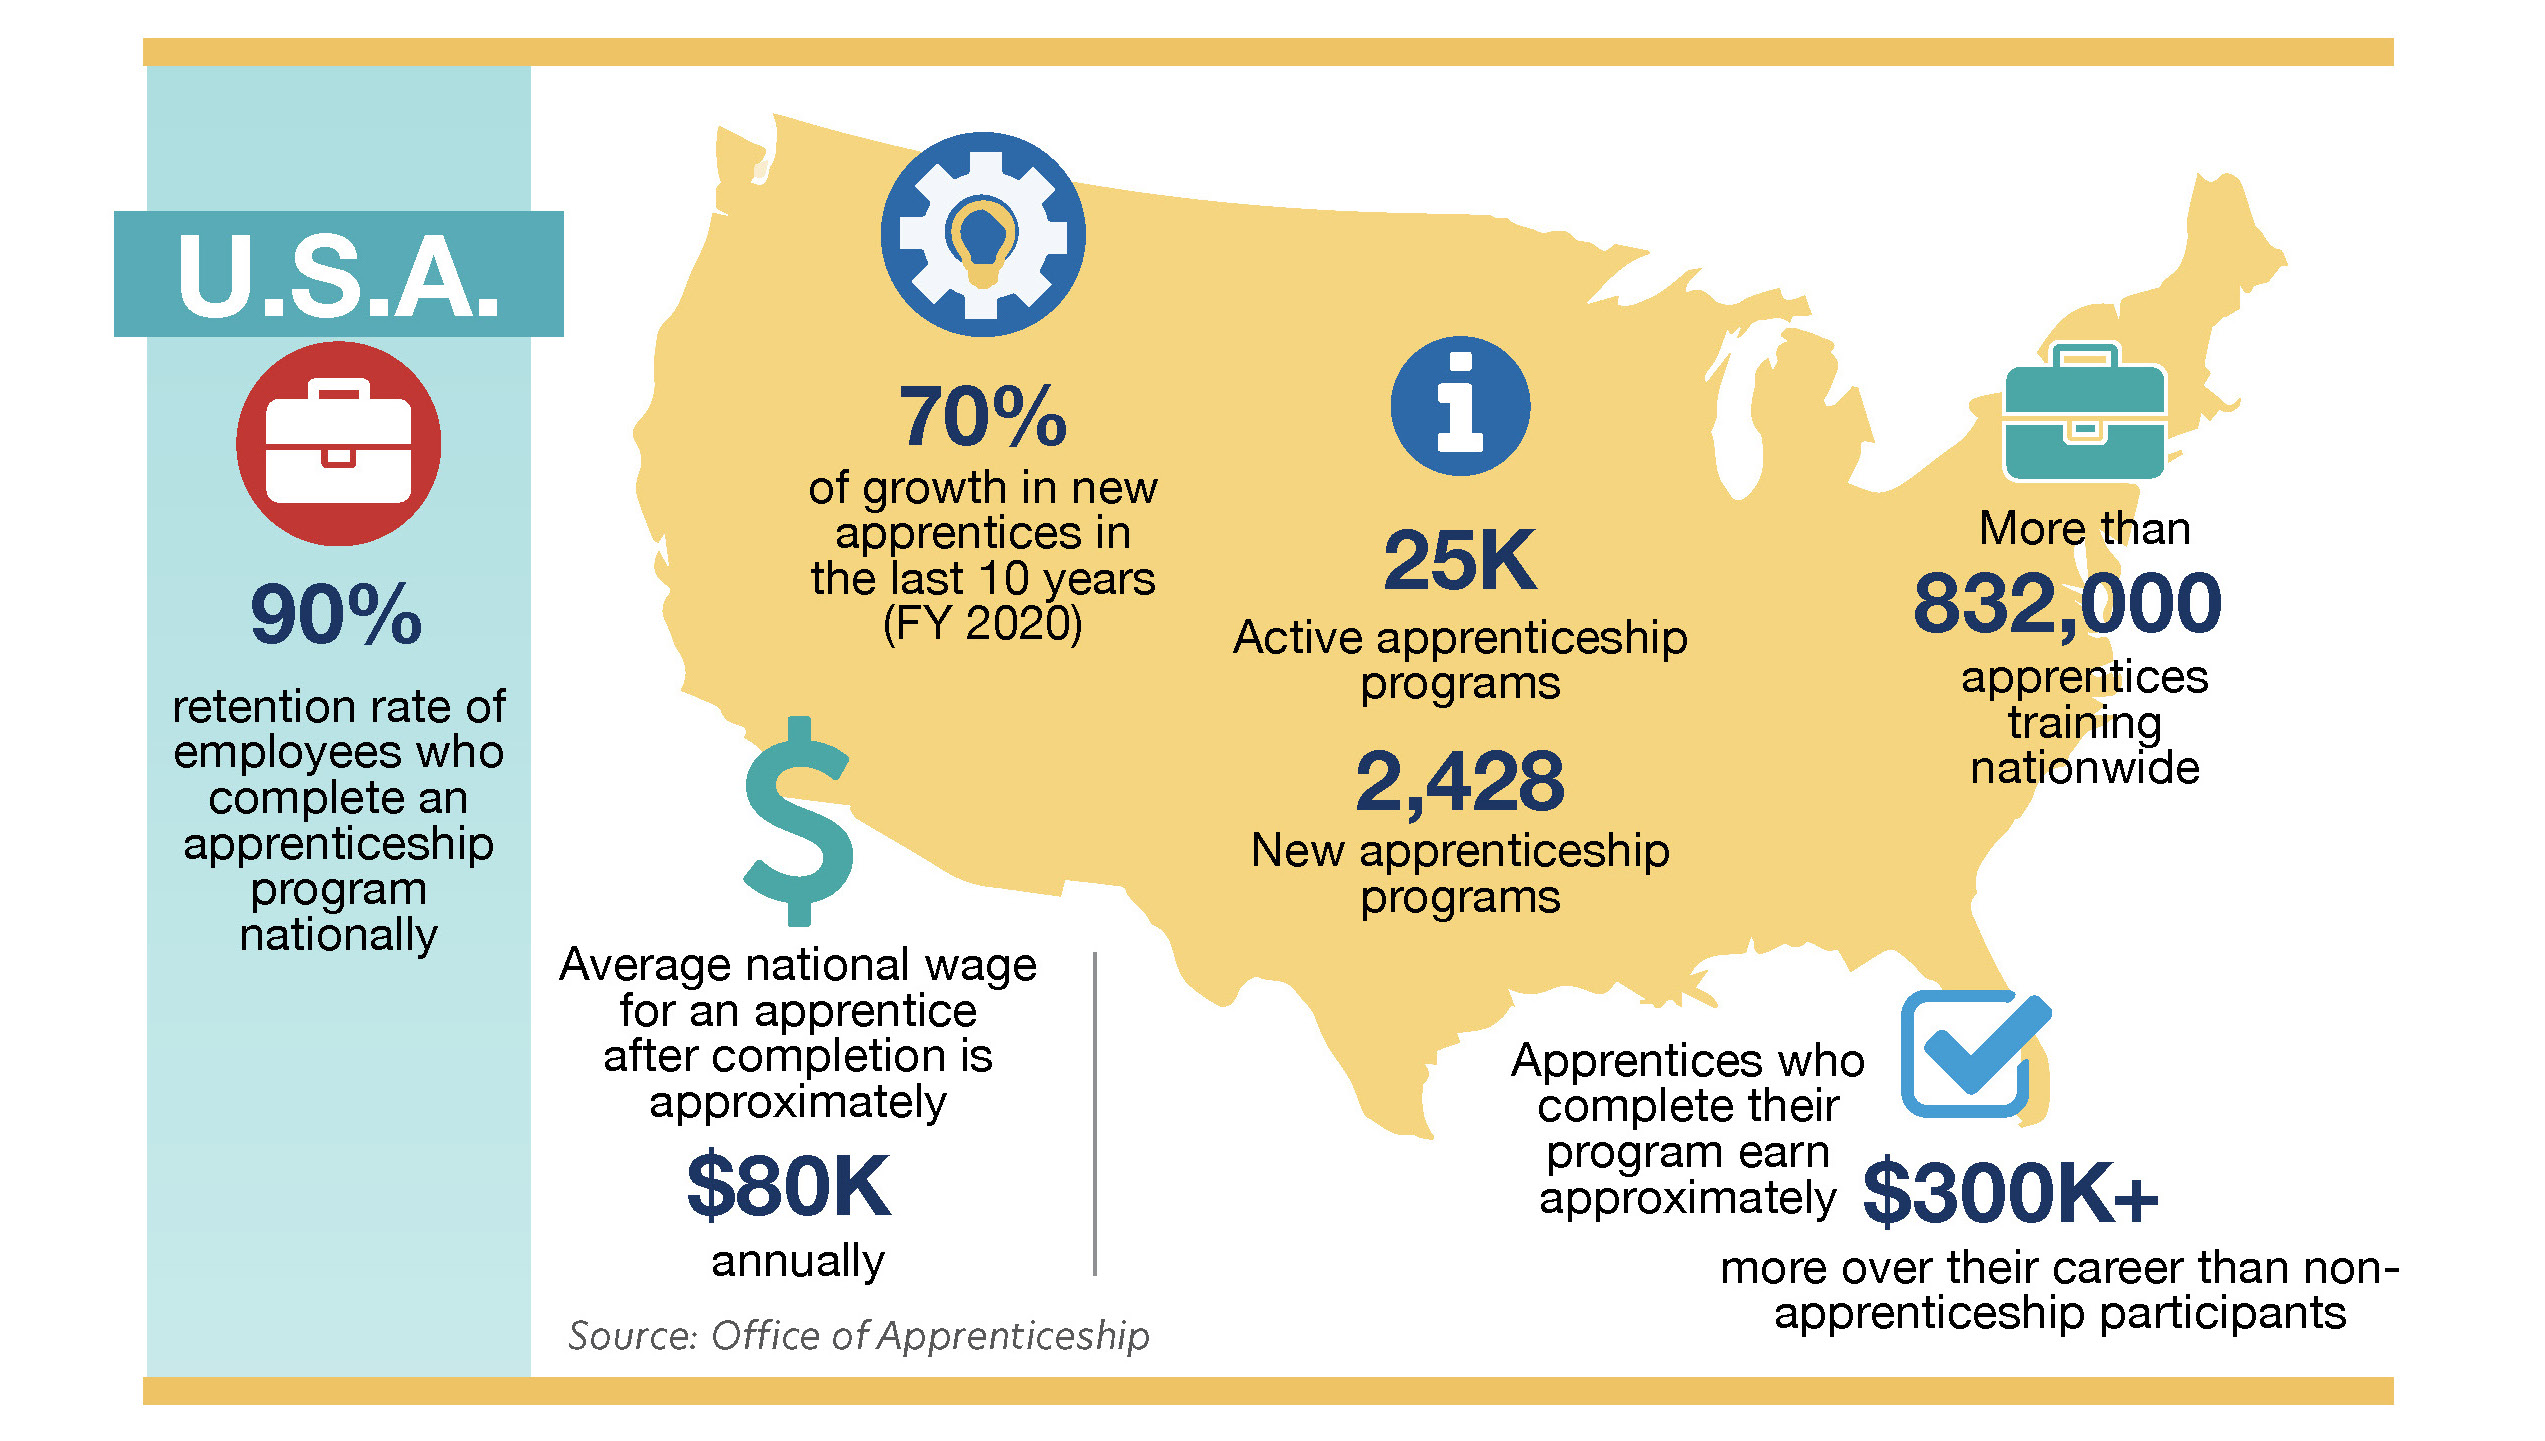 National apprenticeship statistics in 2020 include:
                                    - There is a 94% retention rate of employees who complete an apprenticeship program. 
                                    - The average national wage for an apprentice upon completion is approximately $70k annually. 
                                    - There are nearly 26,000 apprenticeship programs nationwide. 
                                    - Apprentices who complete their program earn approximately $300k more over their career than non-apprenticeship participants.
                                    - There are more than 636,000 apprentices training nationwide.
                                    - There are approximately 1,200 occupations officially recognized as apprenticeable by the U.S. Department of Labor, Office of Apprenticeship.